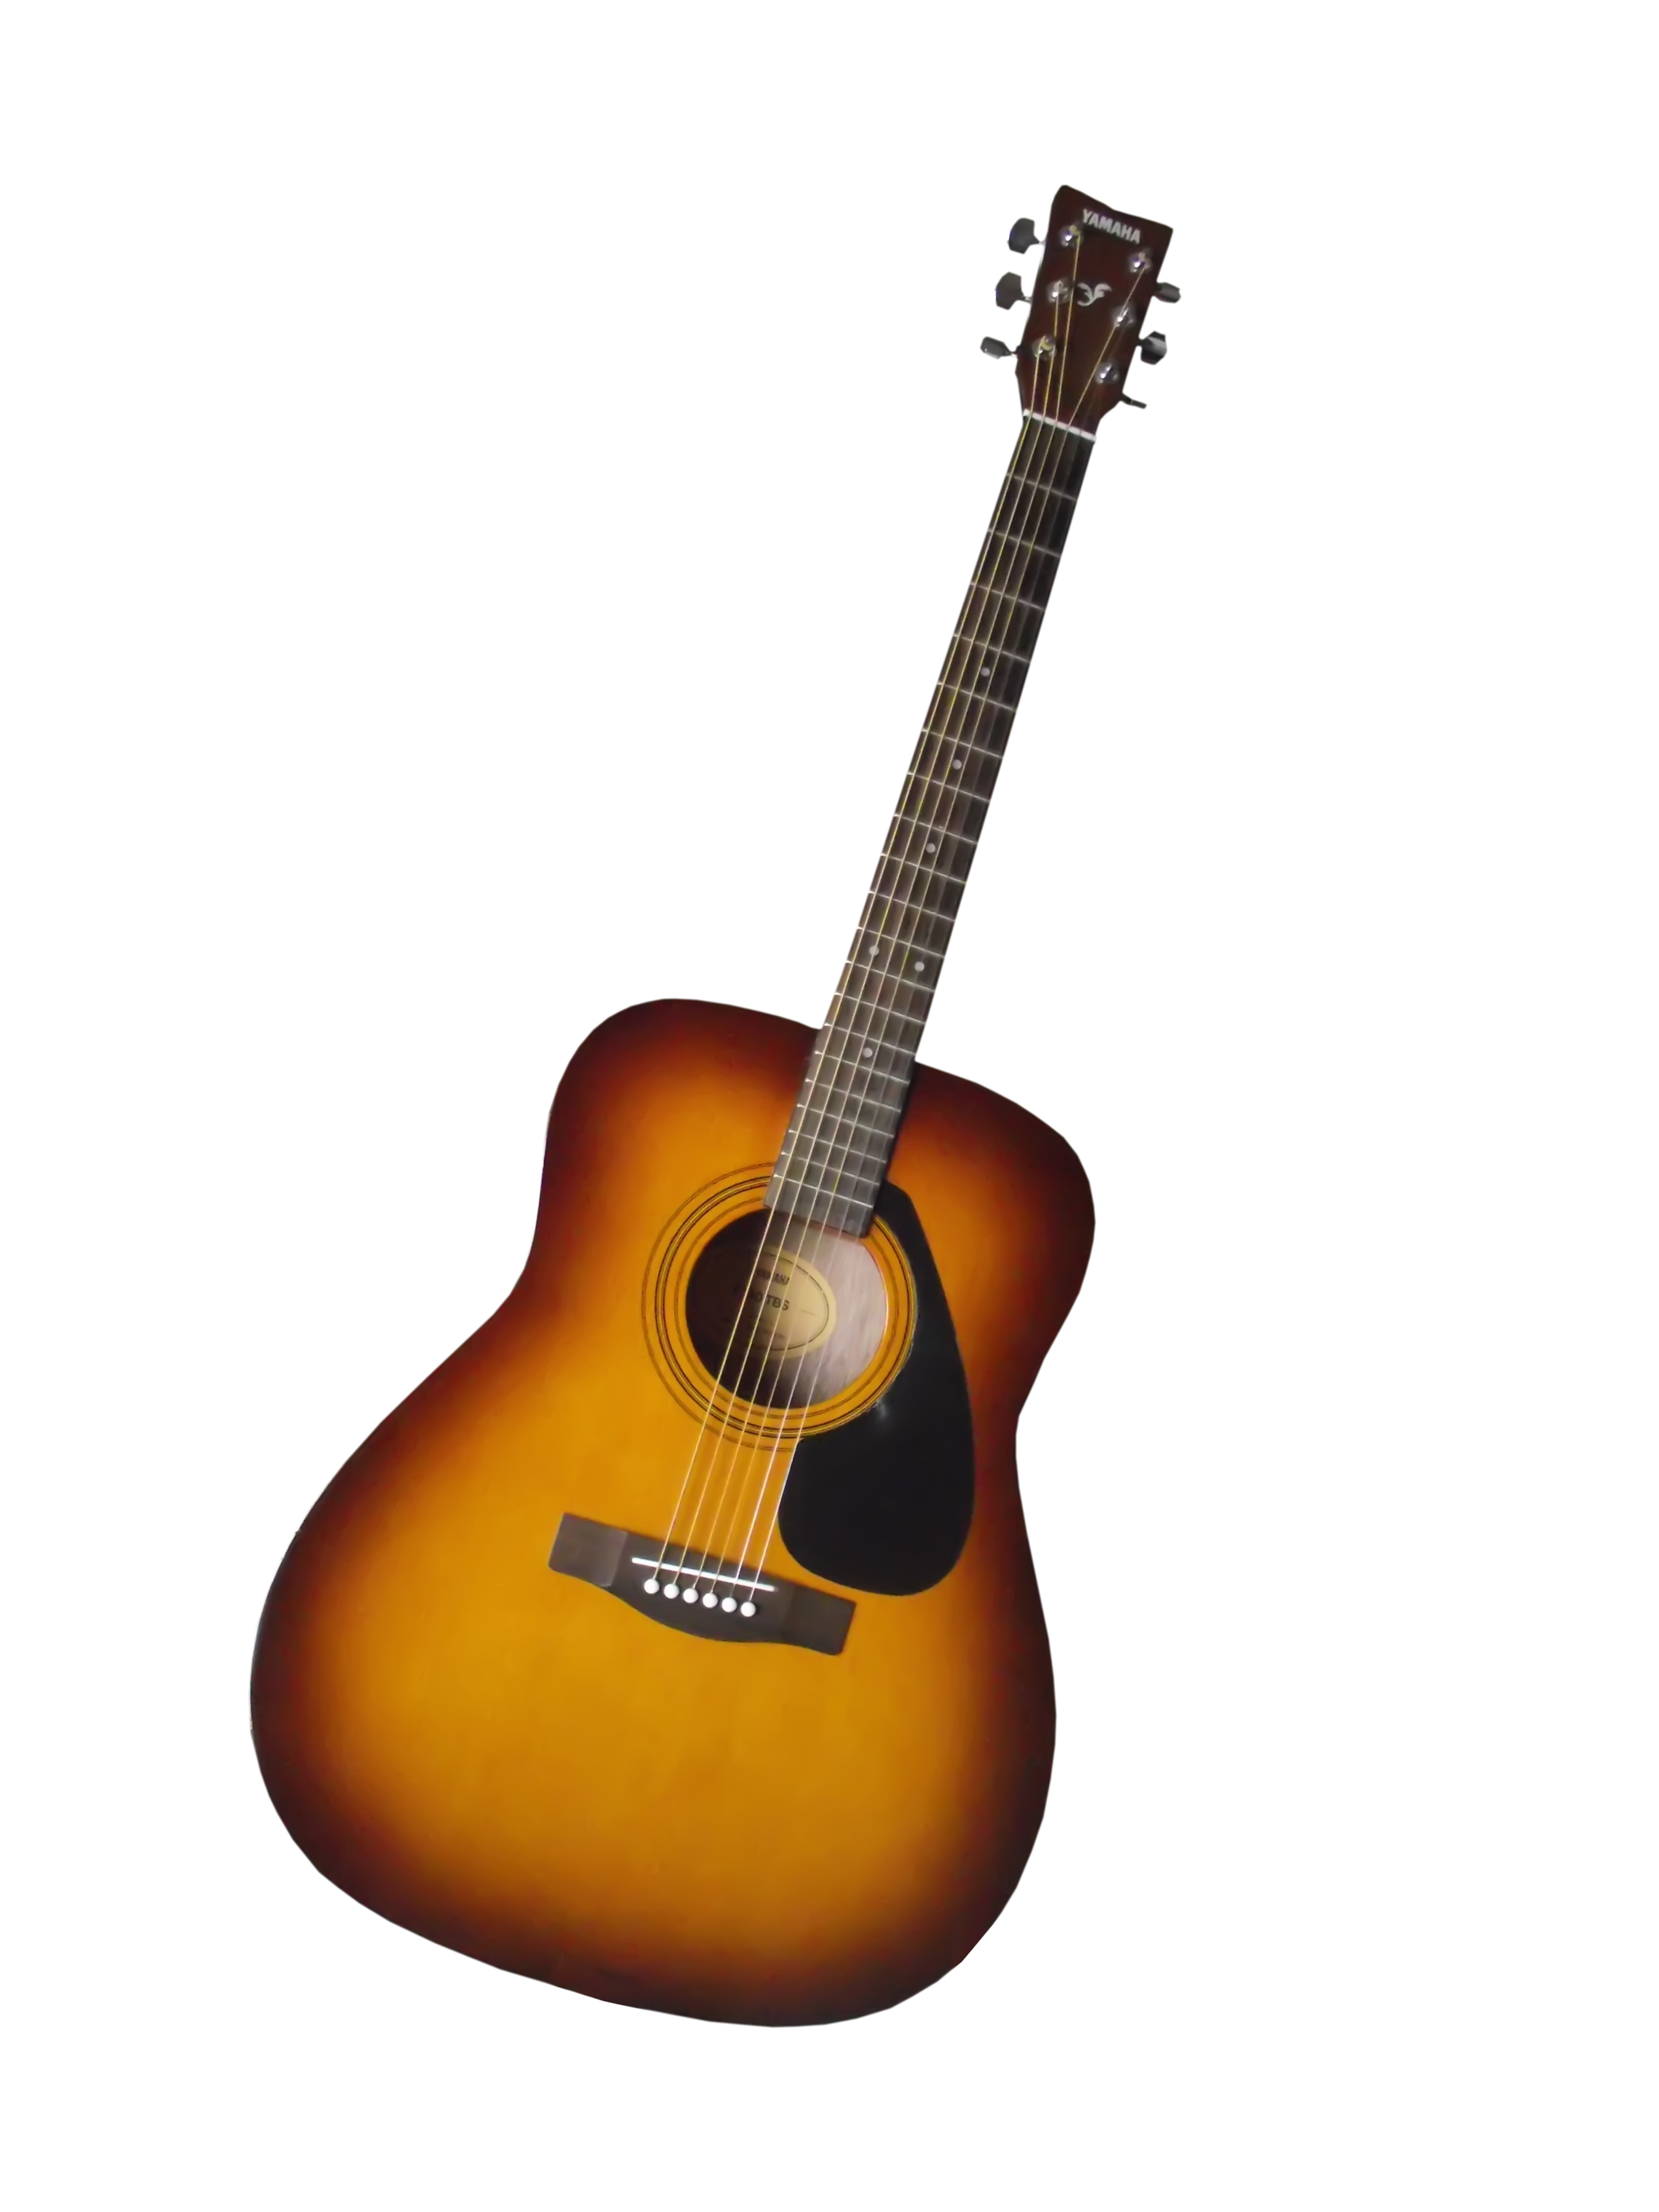 Acoustic Guitar psd by ditney on Clipart library